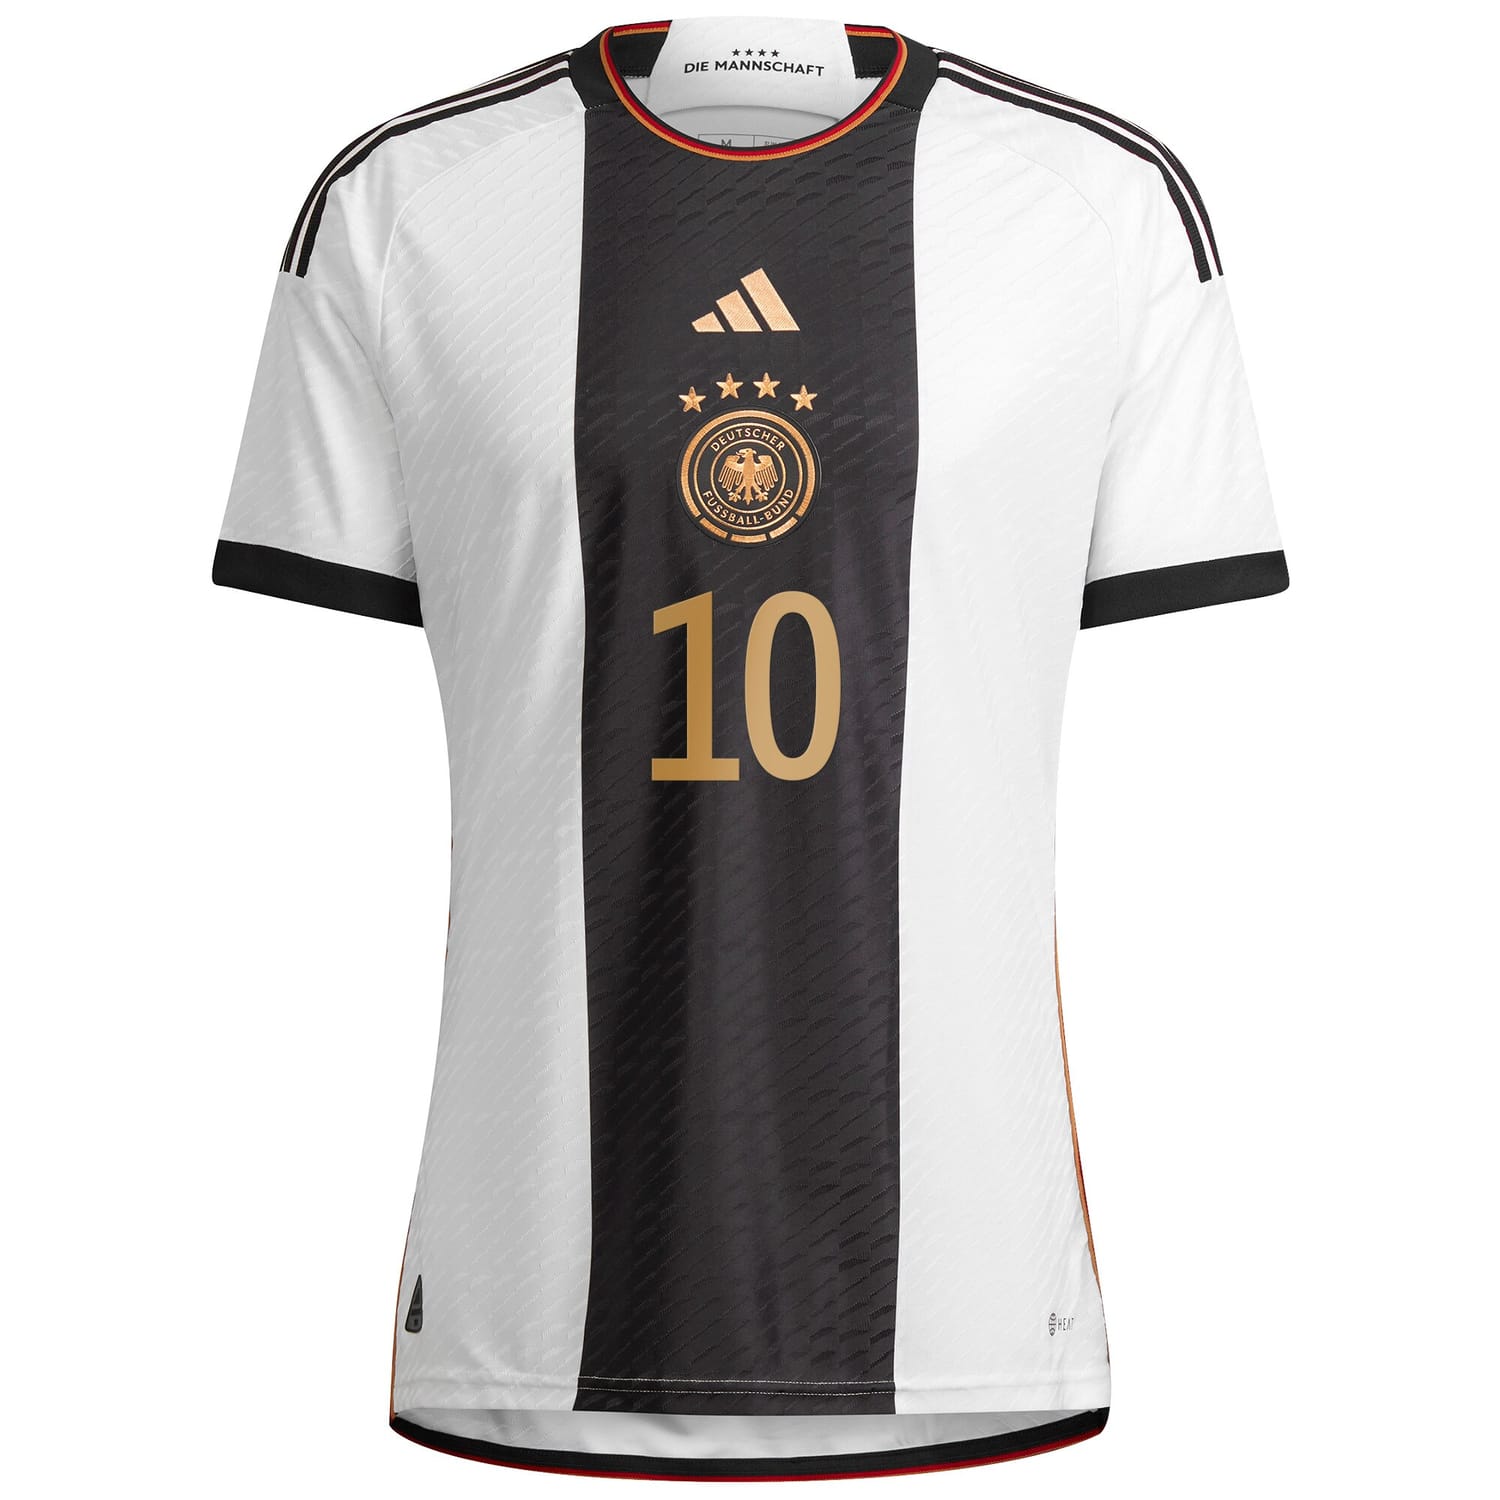 Germany National Team Home Authentic Jersey Shirt player Serge Gnabry 10 printing for Men